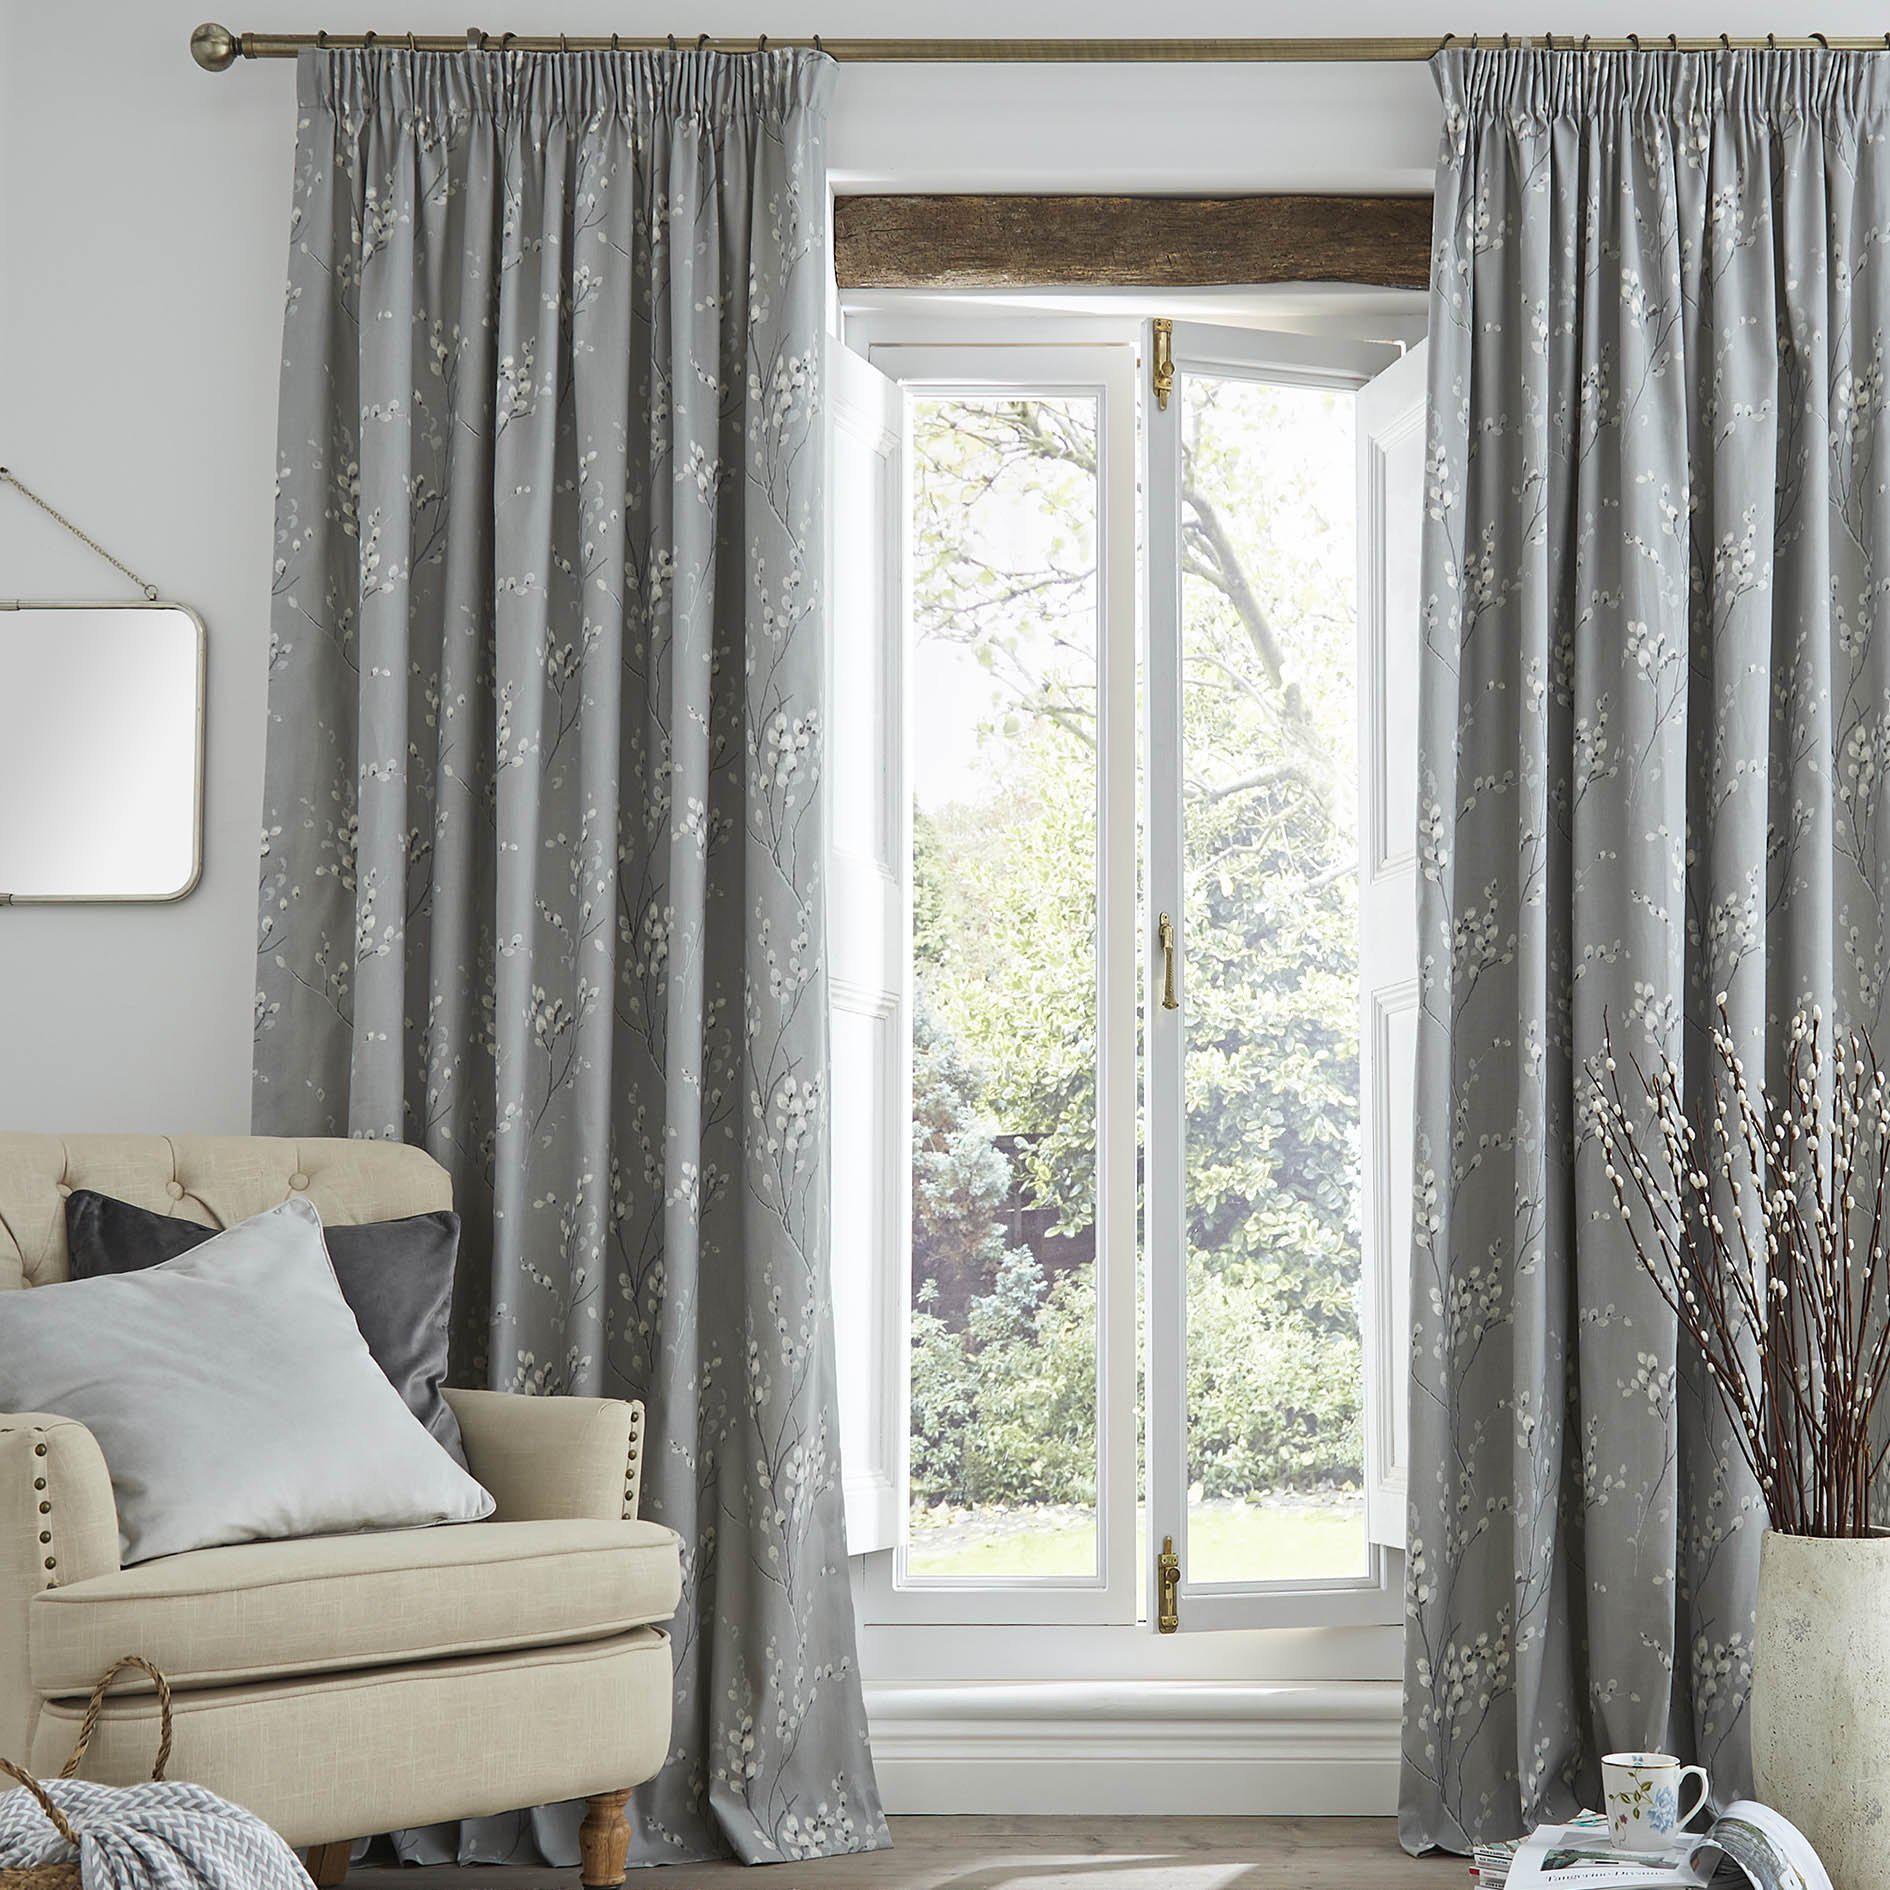 Laura Ashley Pussy Willow Pencil Pleat Curtains - Steel-Williamsons Factory Shop